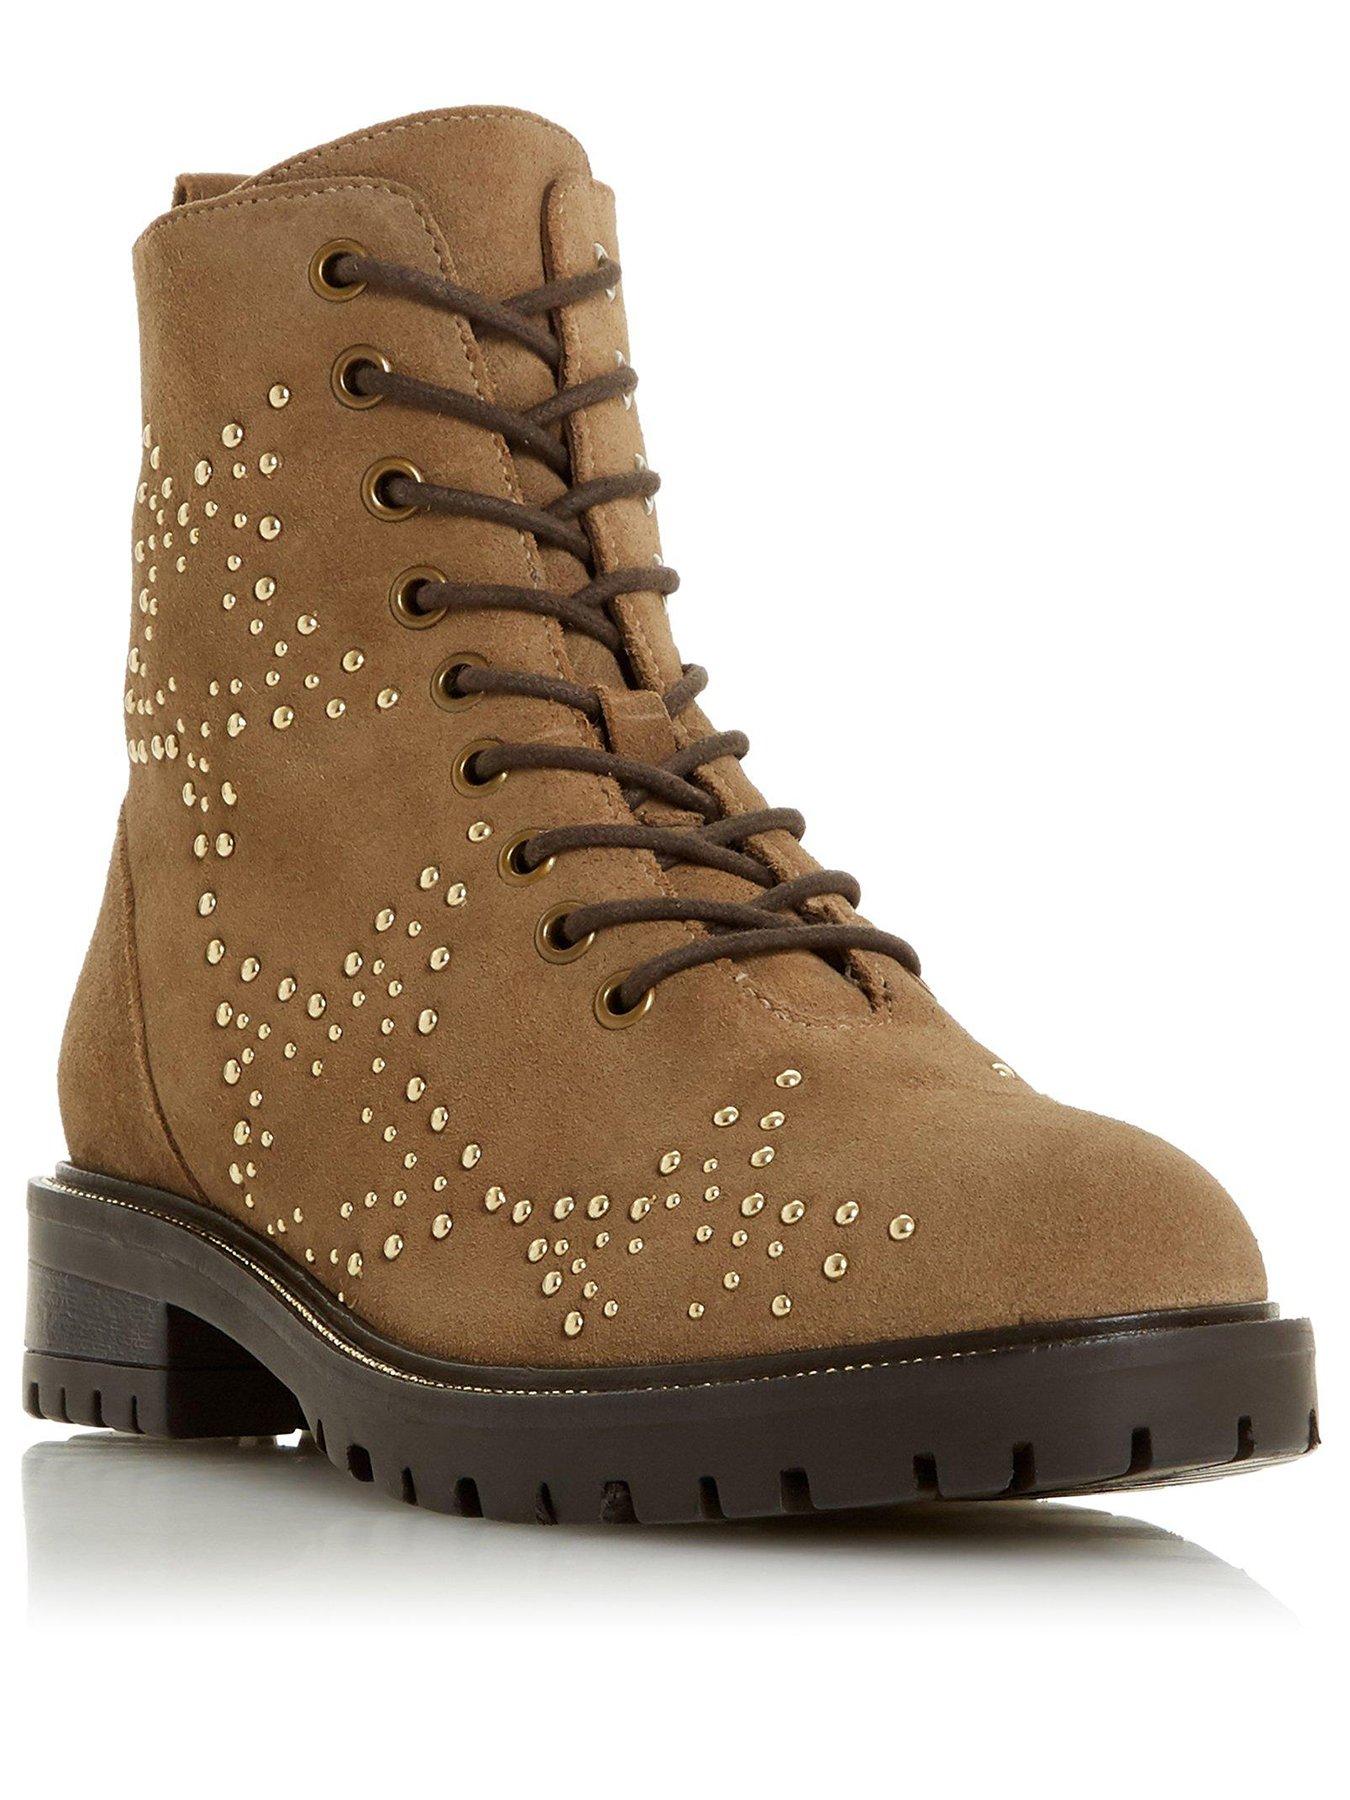 Shoes & boots Prentice Nubuck Studded Star Embellished Lace Up Ankle Boots - Taupe